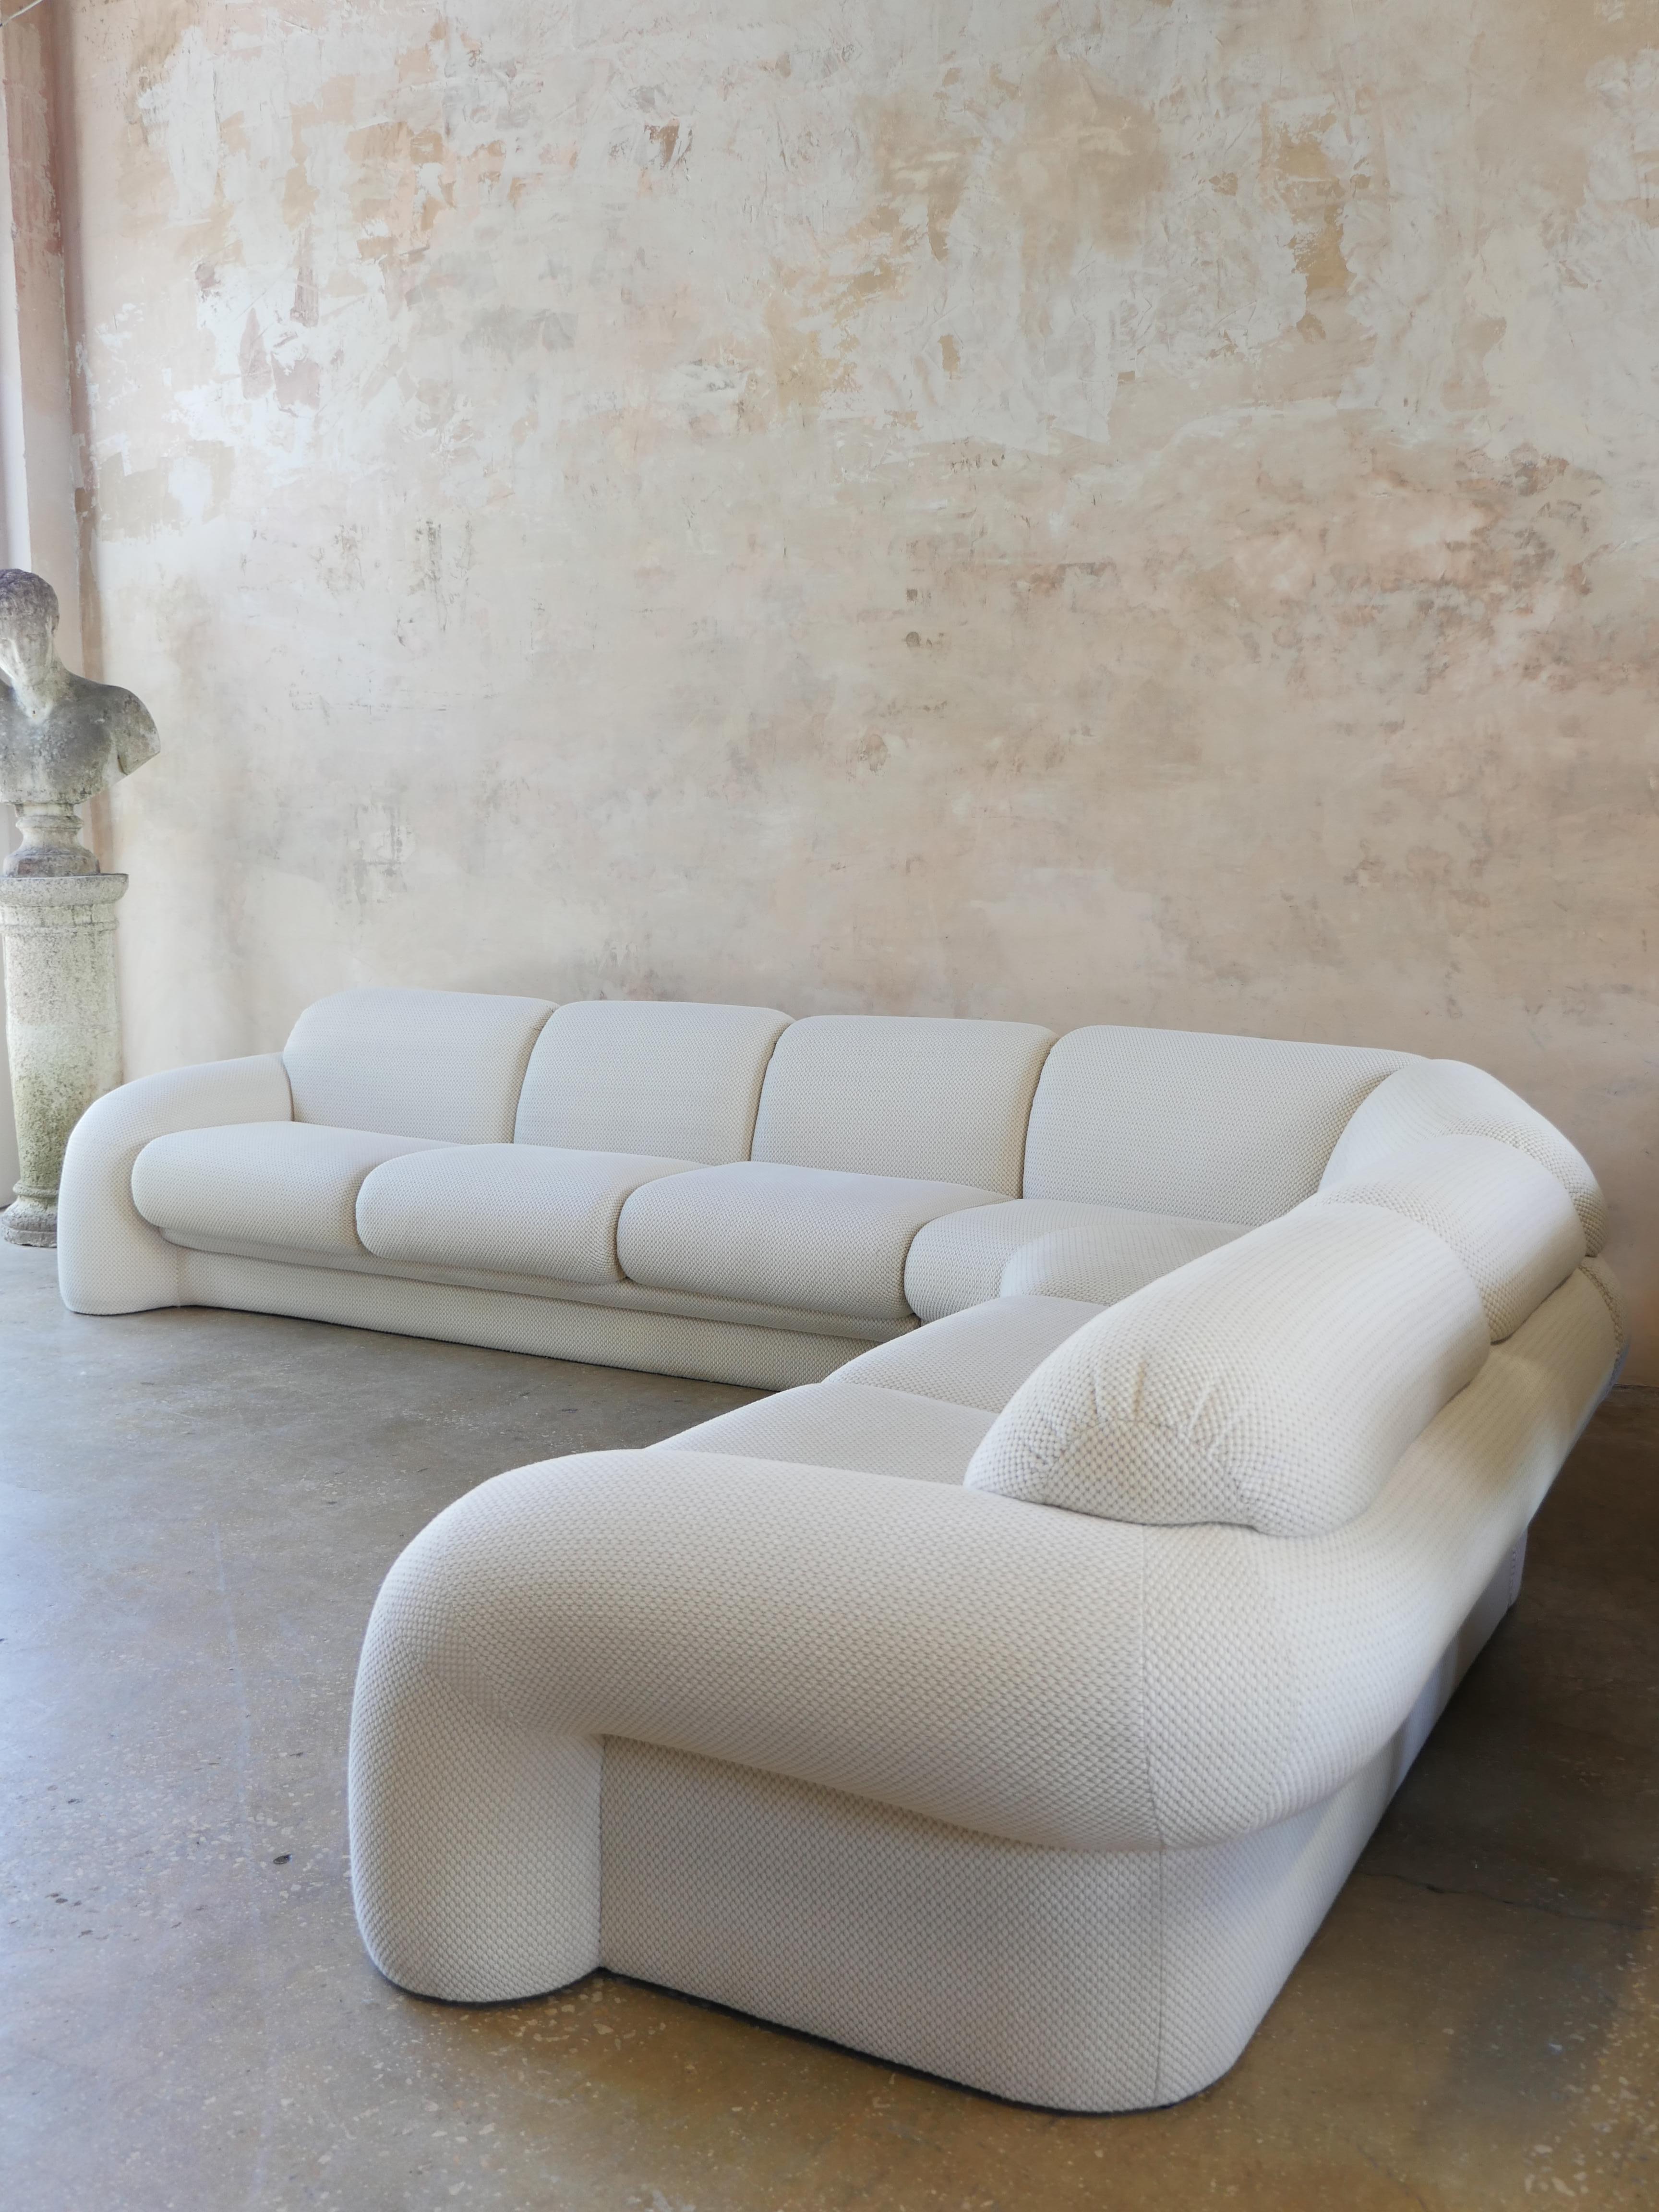 Monumental 1990s three-piece sectional sofa by Preview Furniture (commissioned by Judith Norman), with cylindrical chubby arms that curve throughout the back of the entire sofa. This breathtaking vintage sofa contains its original off-white,